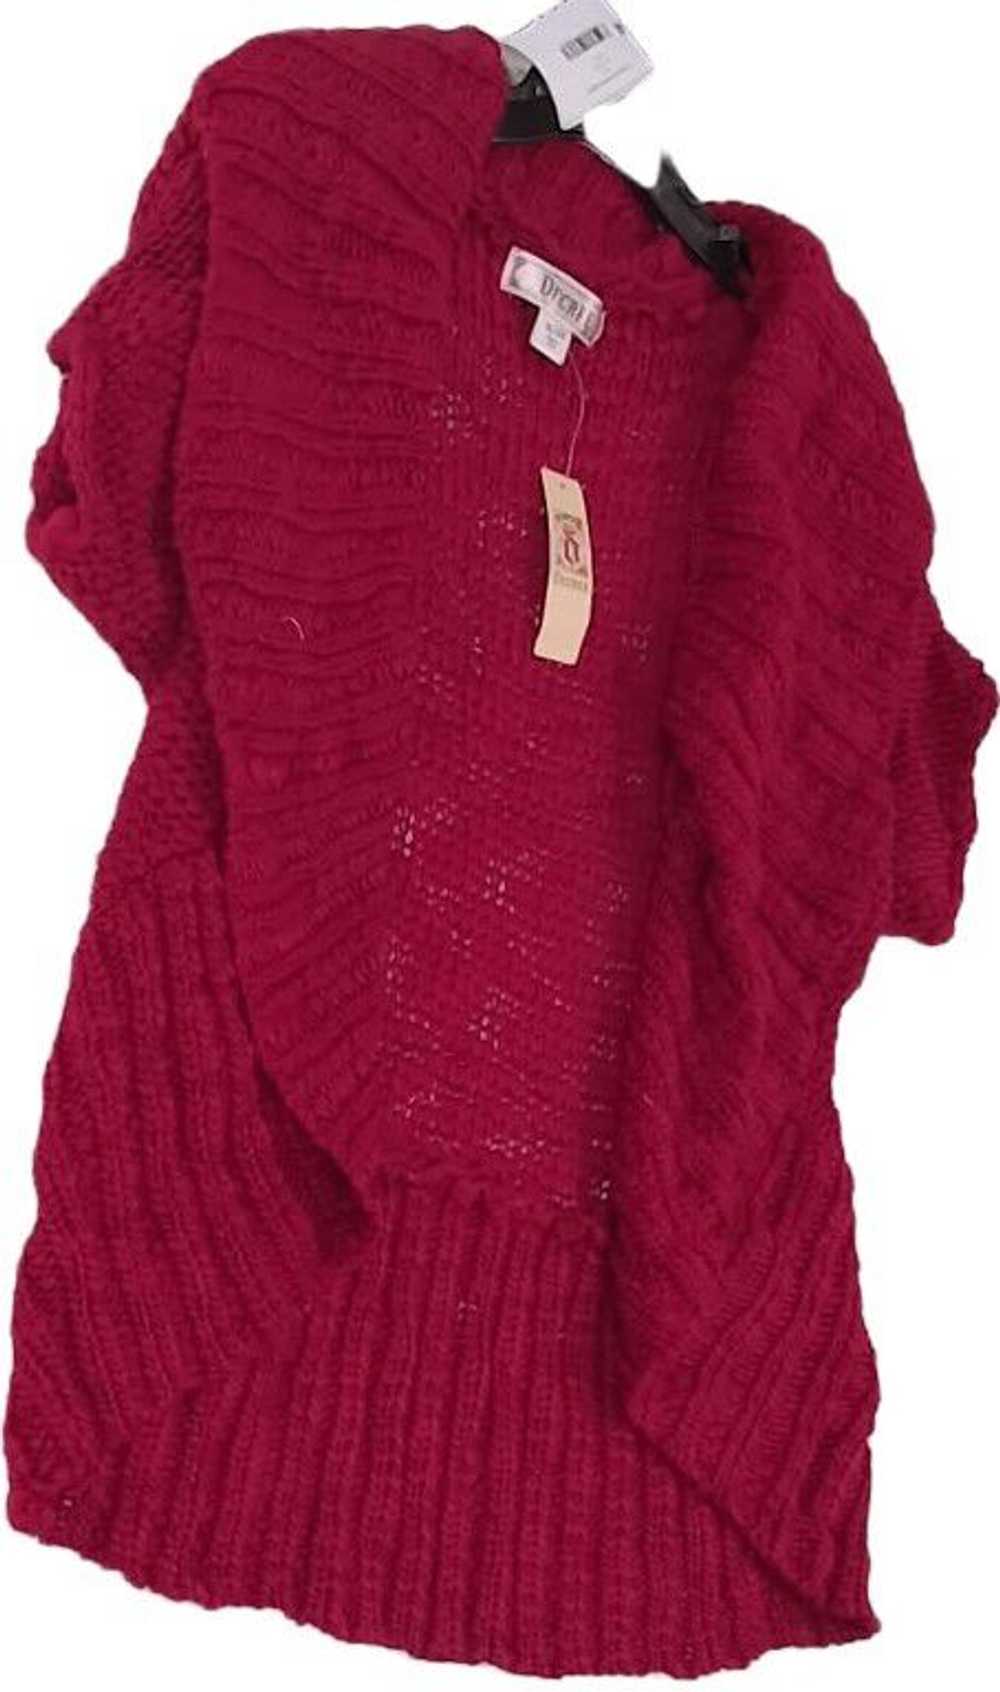 Decree Short Sleeve Knitted Cardigan Sweater Wome… - image 3